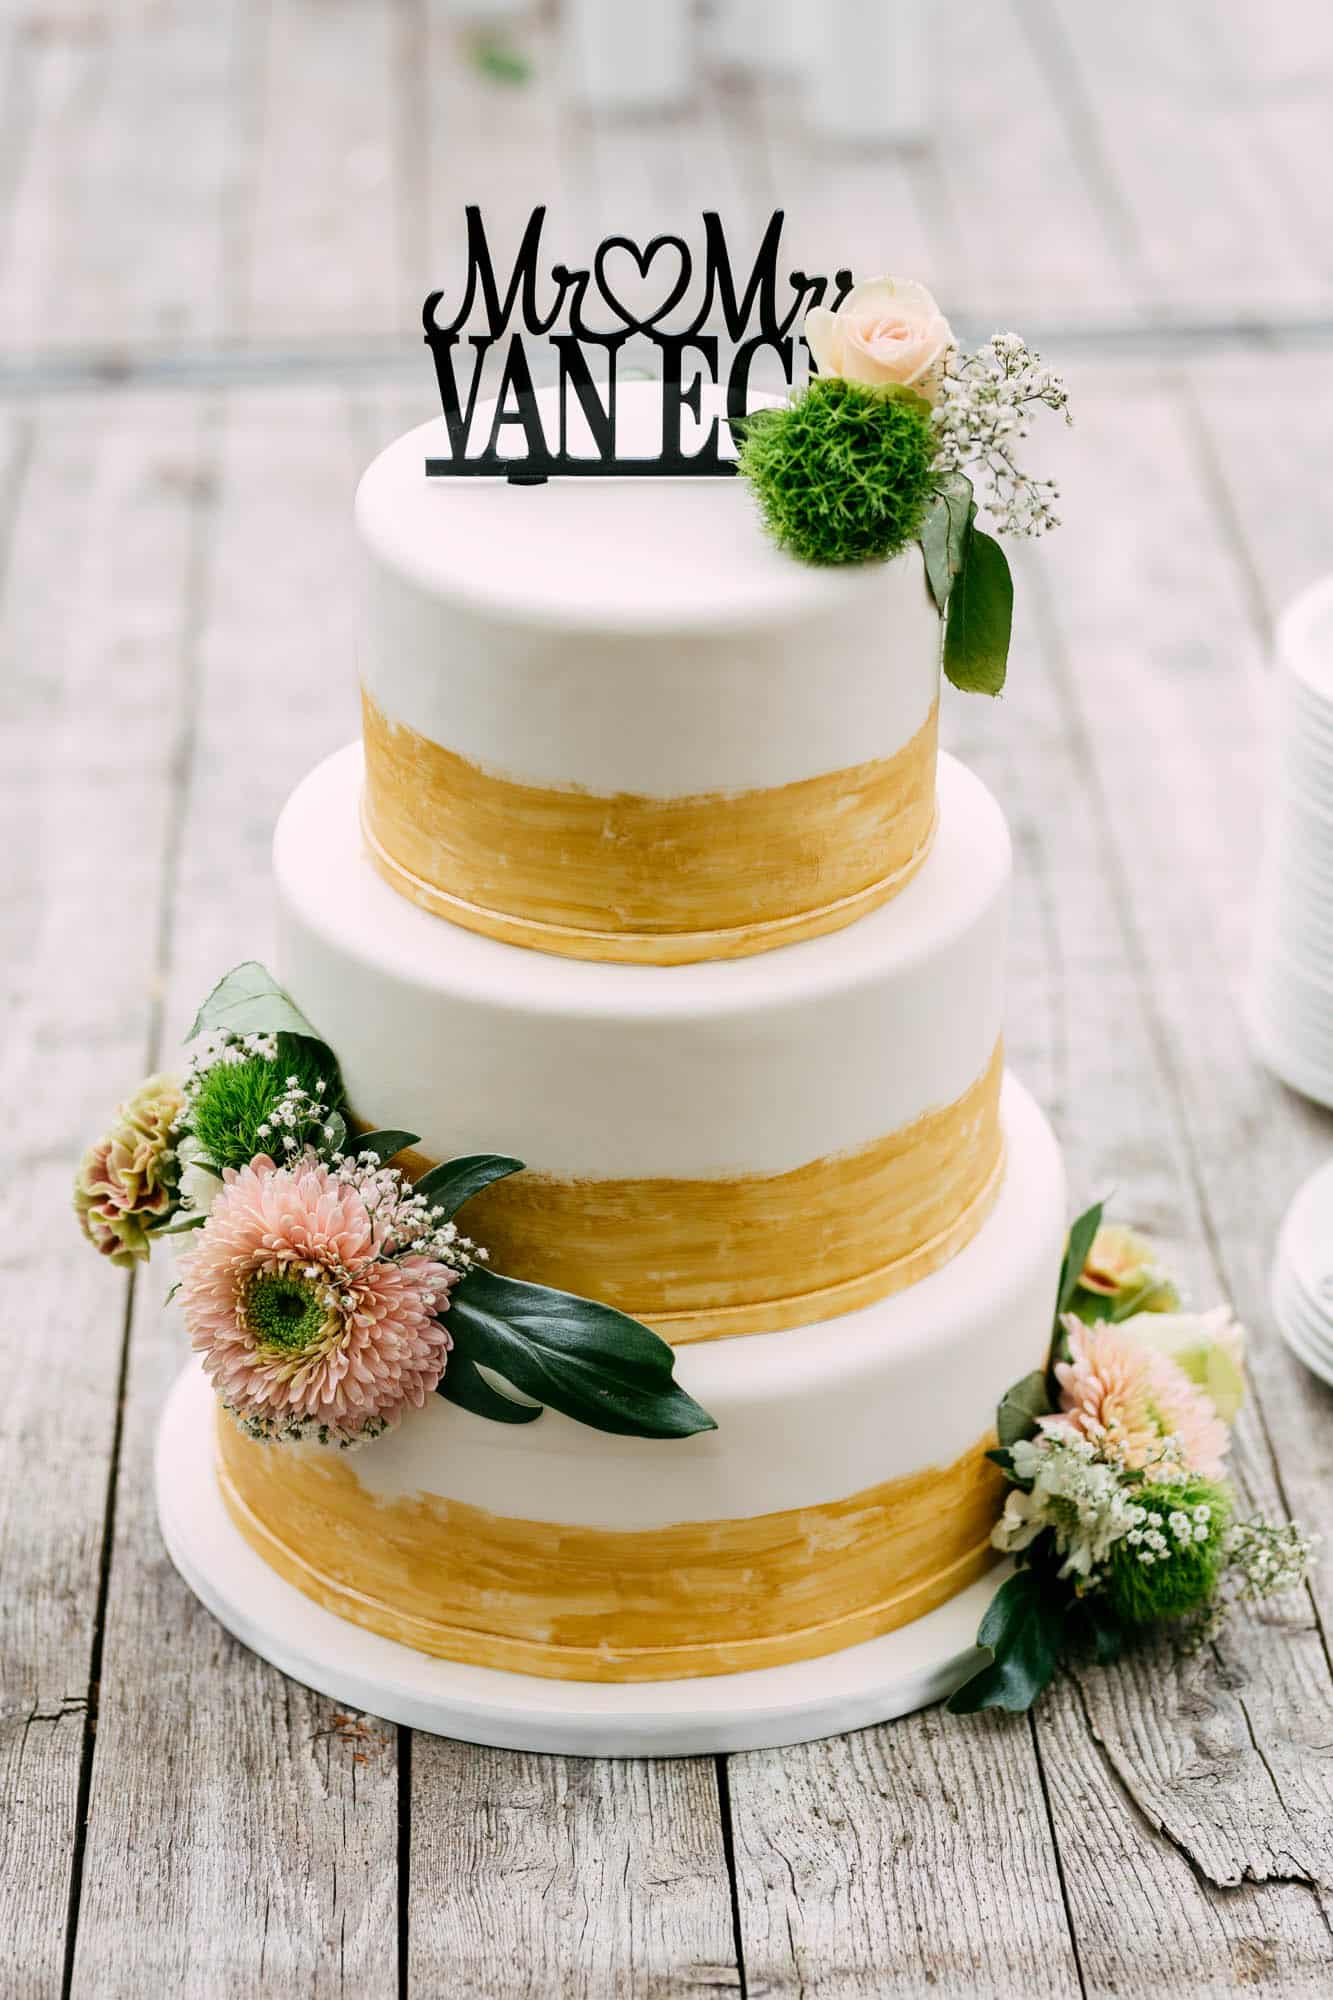 Wedding cake with White, Yellow and Flowers